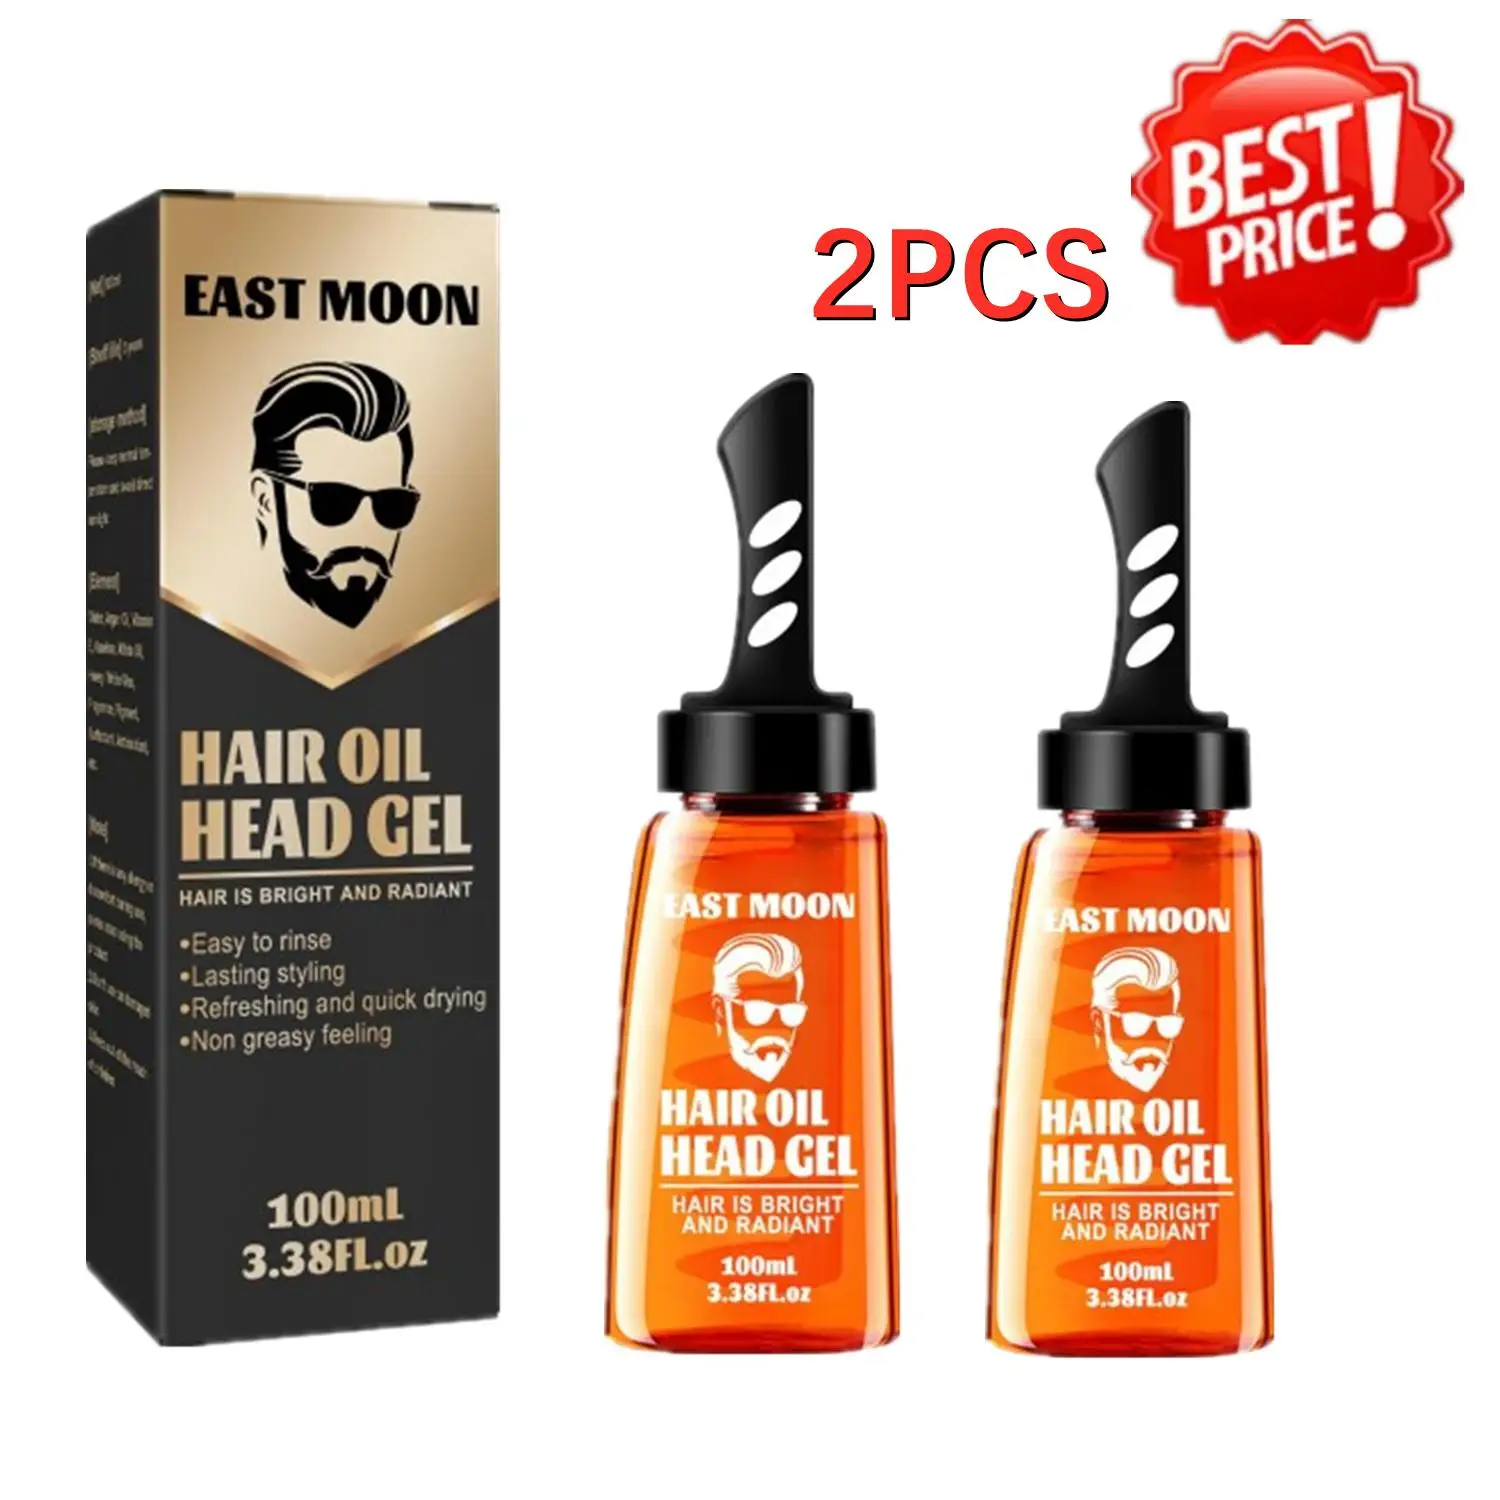 2pcs Men Hair Wax Gel With Comb Lasting Hold Cream Drying Hair Gel Oil Pomade Styling Hair Hair Oil Quick Fluffy Wax 100ML 2pcs 6 3mm 316 stainless steel quick release pin for boat bimini top deck hinge marinehardware boat